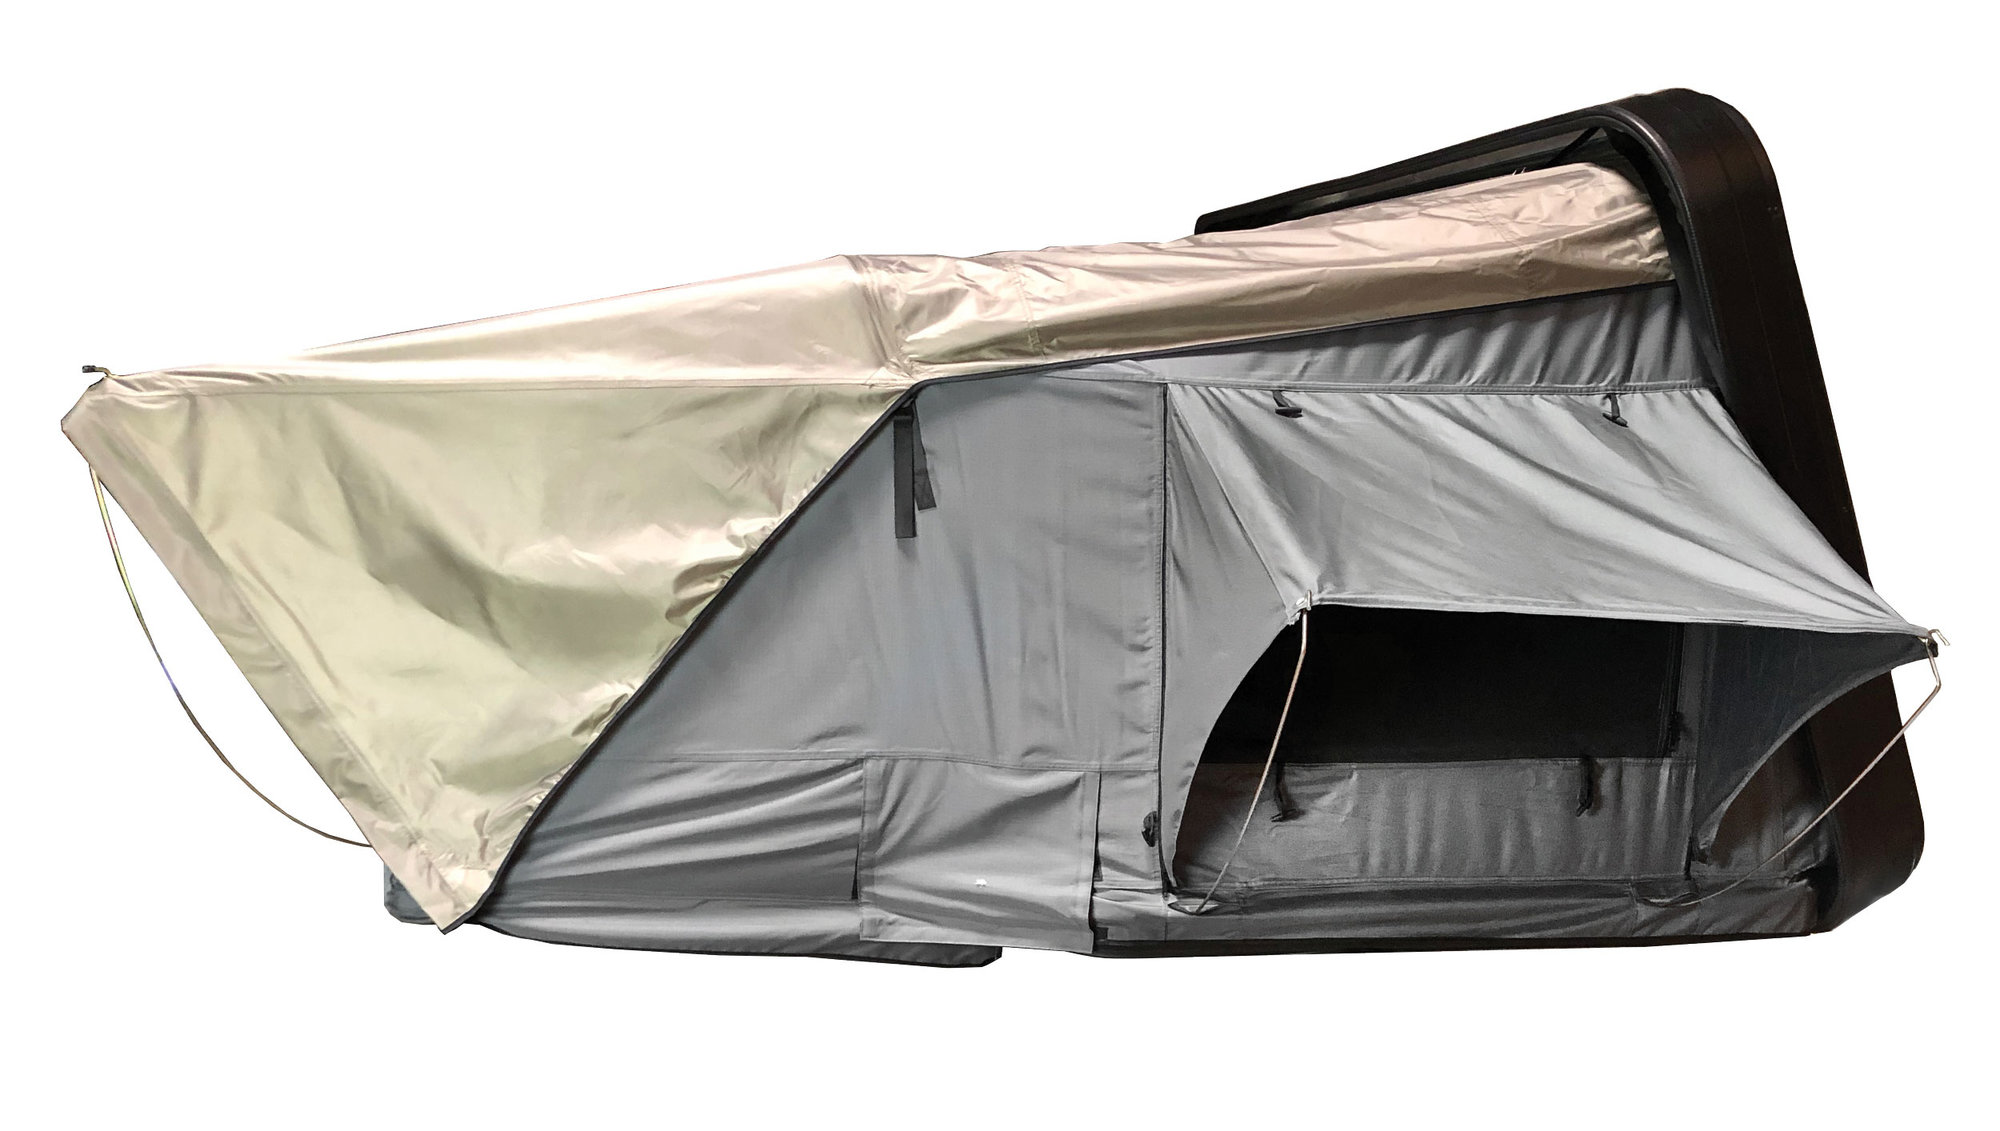 Overland Vehicle Systems 18089901 Bushveld Hard Shell Roof Top Tent